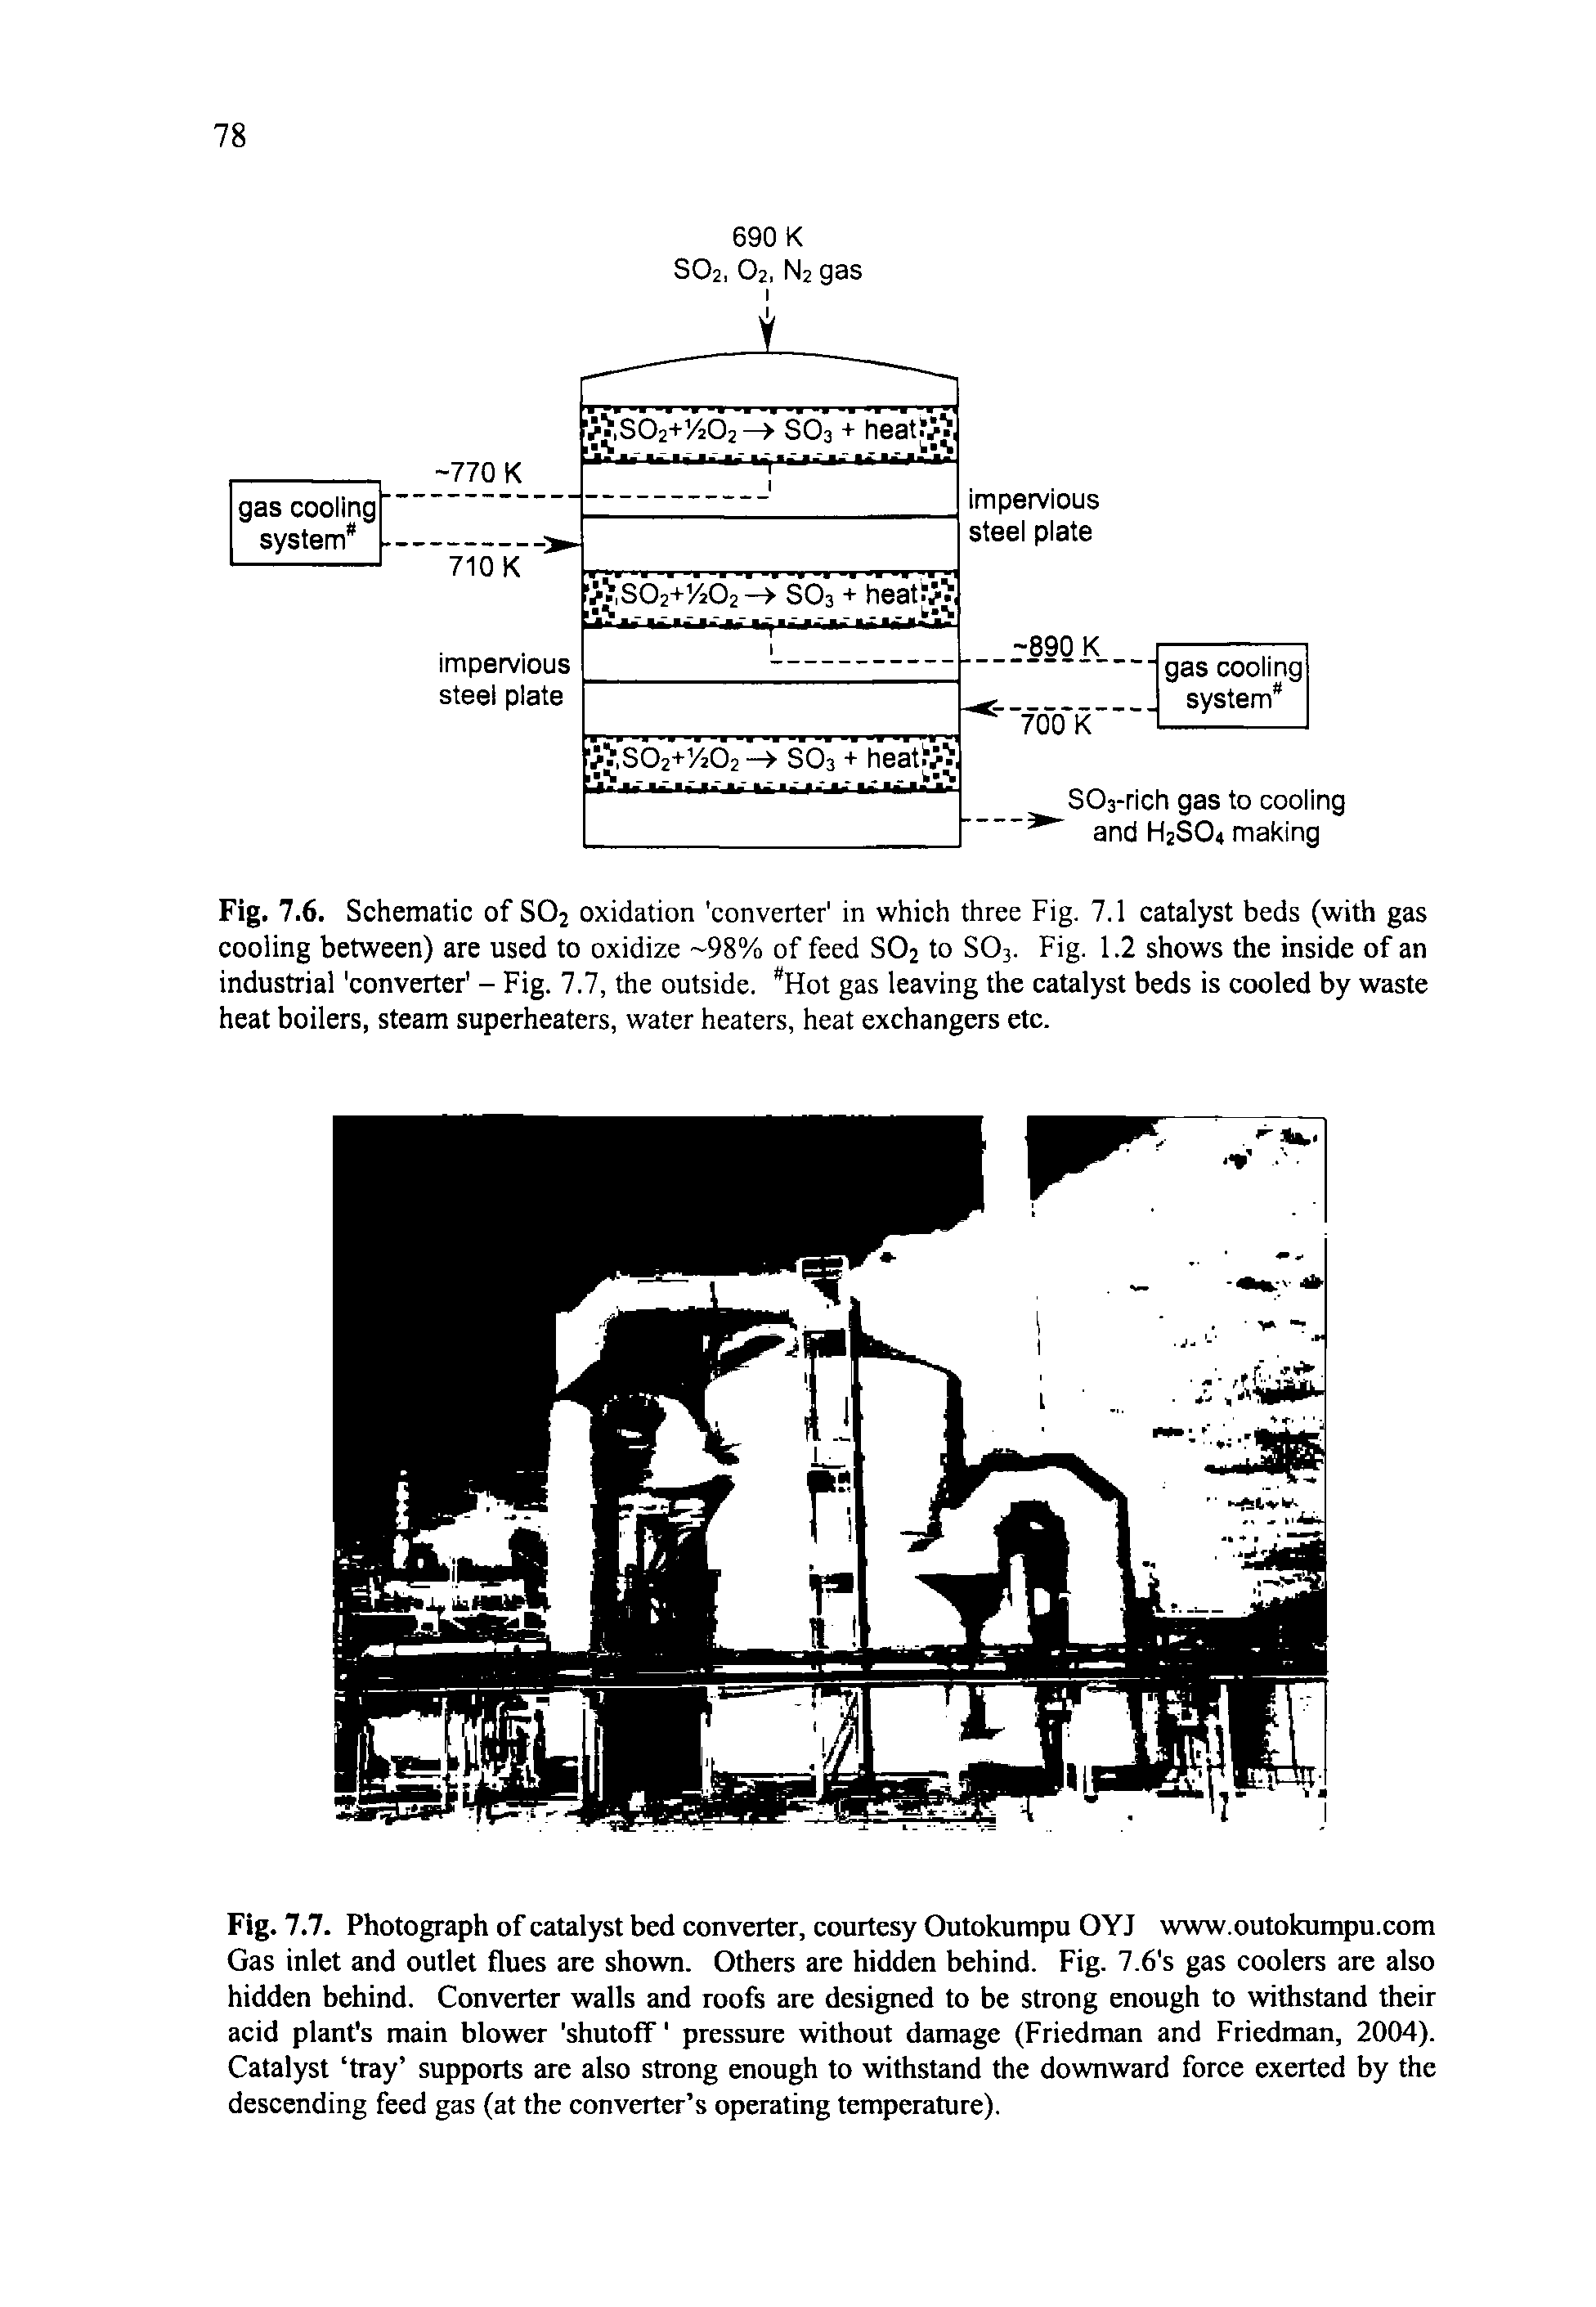 Fig. 7.6. Schematic of S02 oxidation converter in which three Fig. 7.1 catalyst beds (with gas cooling between) are used to oxidize -98% of feed S02 to S03. Fig. 1.2 shows the inside of an industrial converter - Fig. 7.7, the outside. Hot gas leaving the catalyst beds is cooled by waste heat boilers, steam superheaters, water heaters, heat exchangers etc.